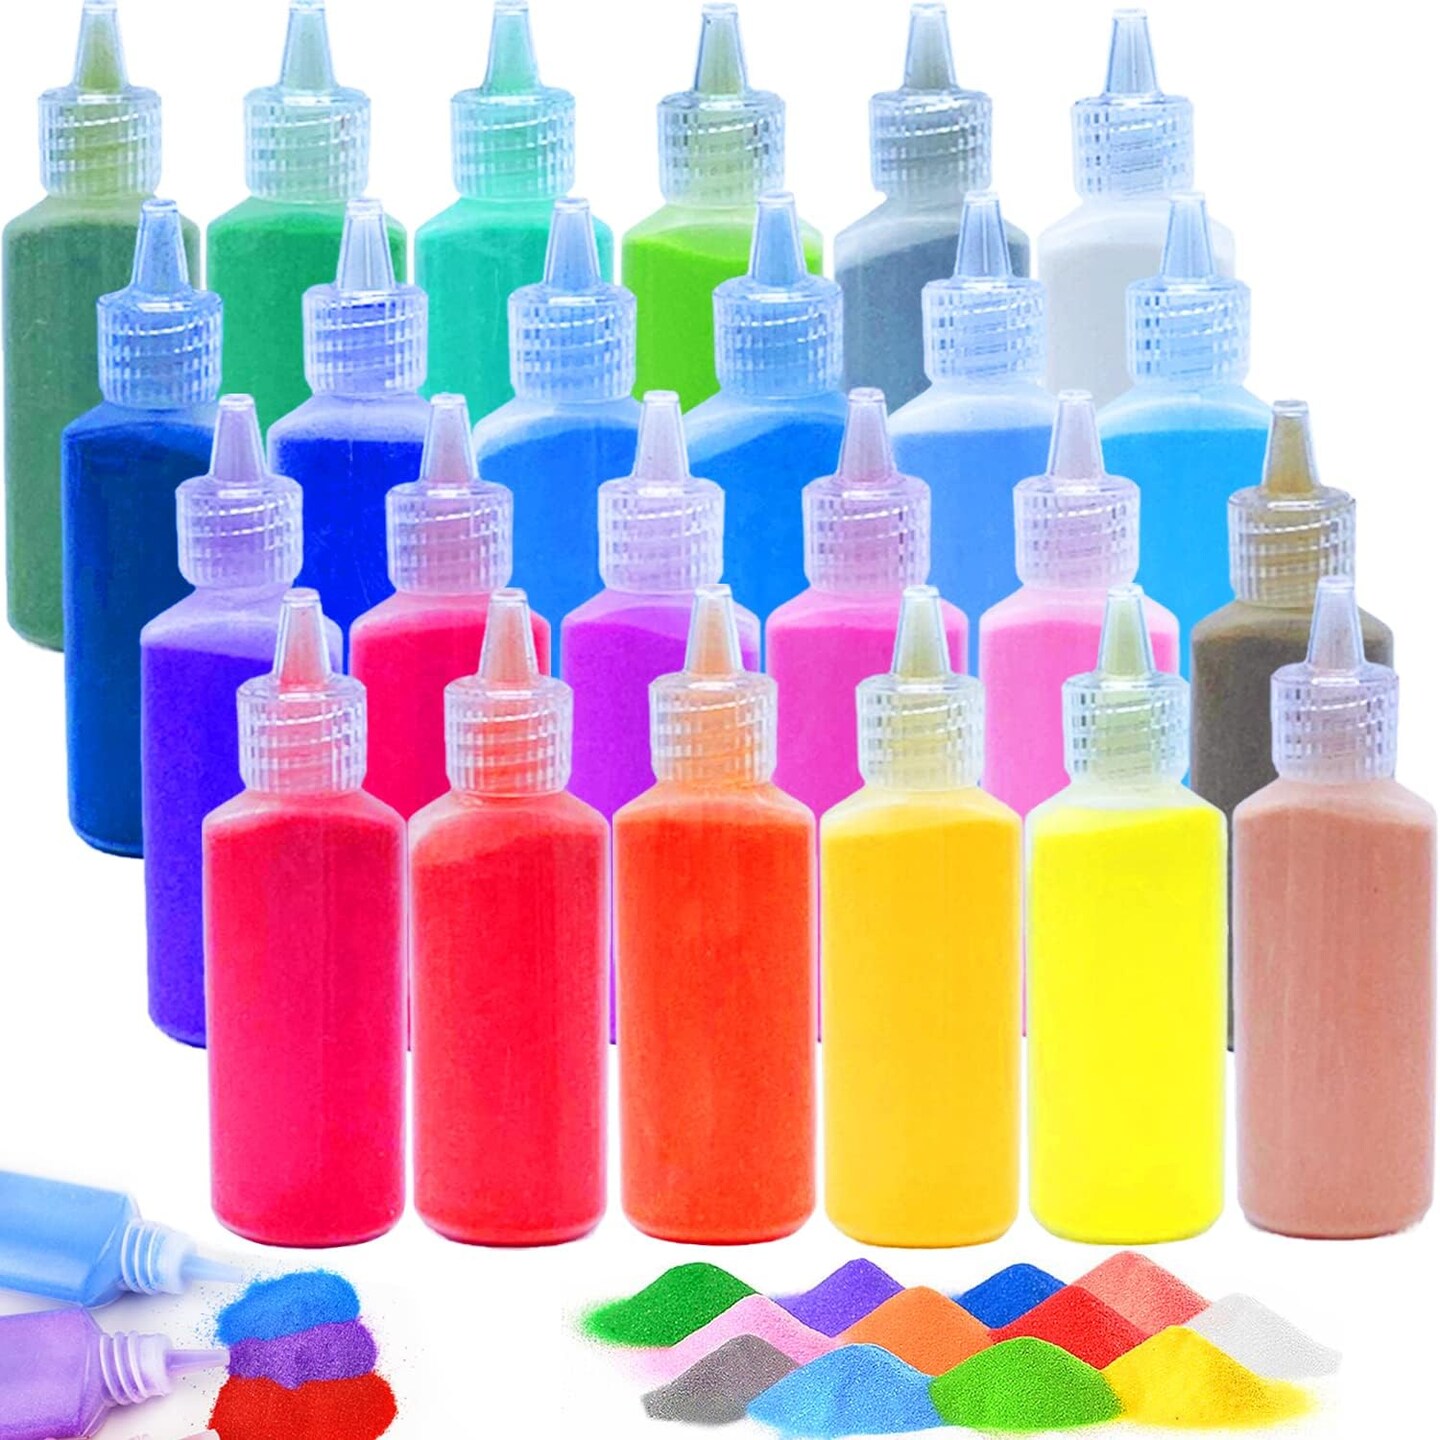 24 pieces of art sand, 1.24oz colored sand bottles, sand arts and crafts kit, scenic sand for kids, DIY sand painting, wedding decoration.